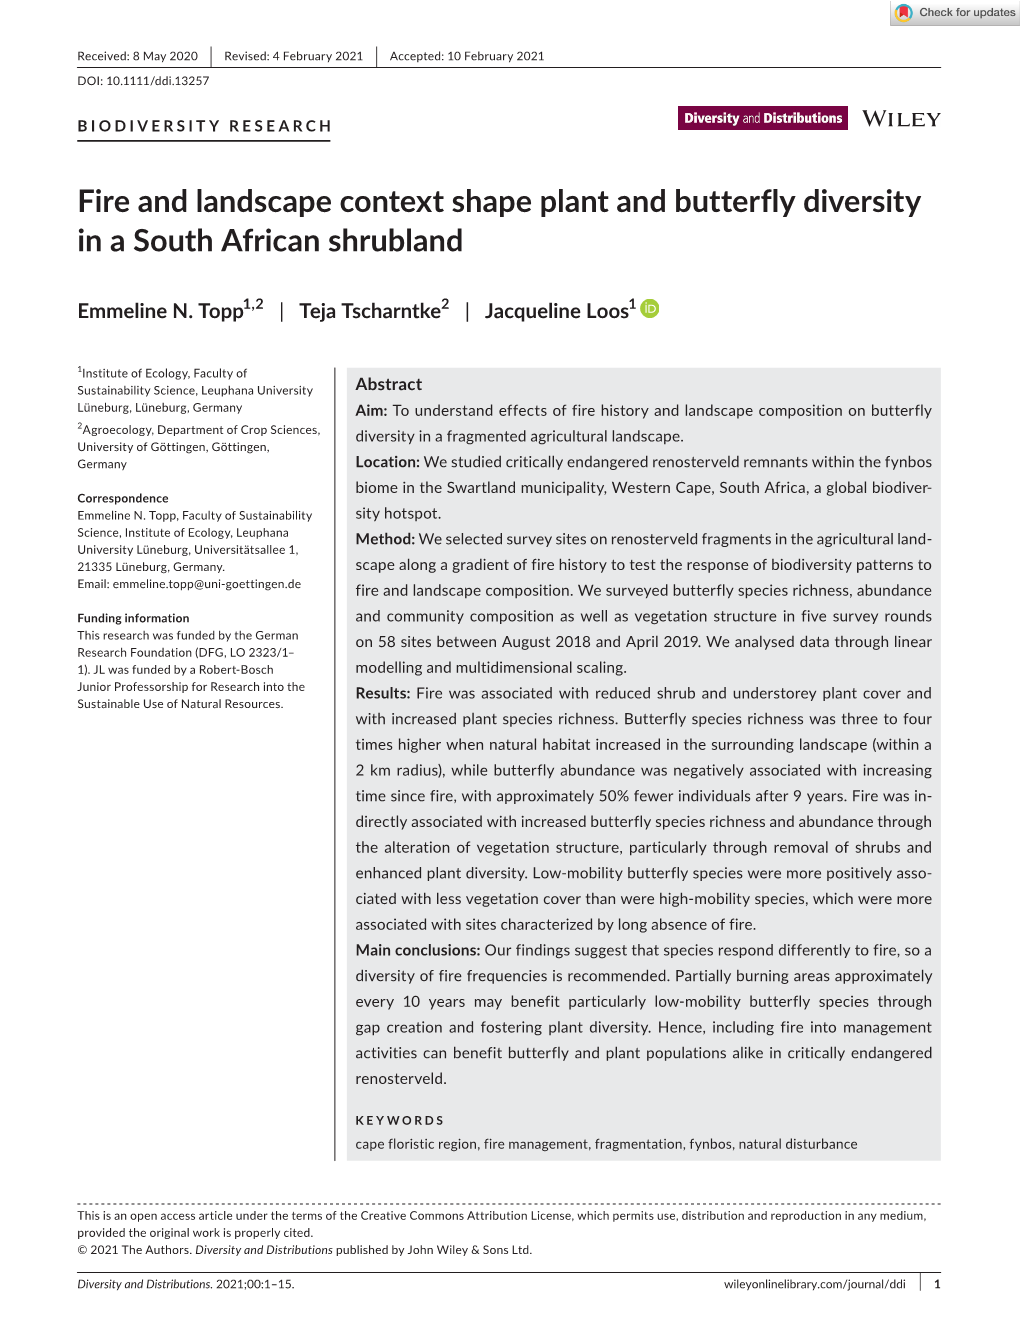 Fire and Landscape Context Shape Plant and Butterfly Diversity in a South African Shrubland